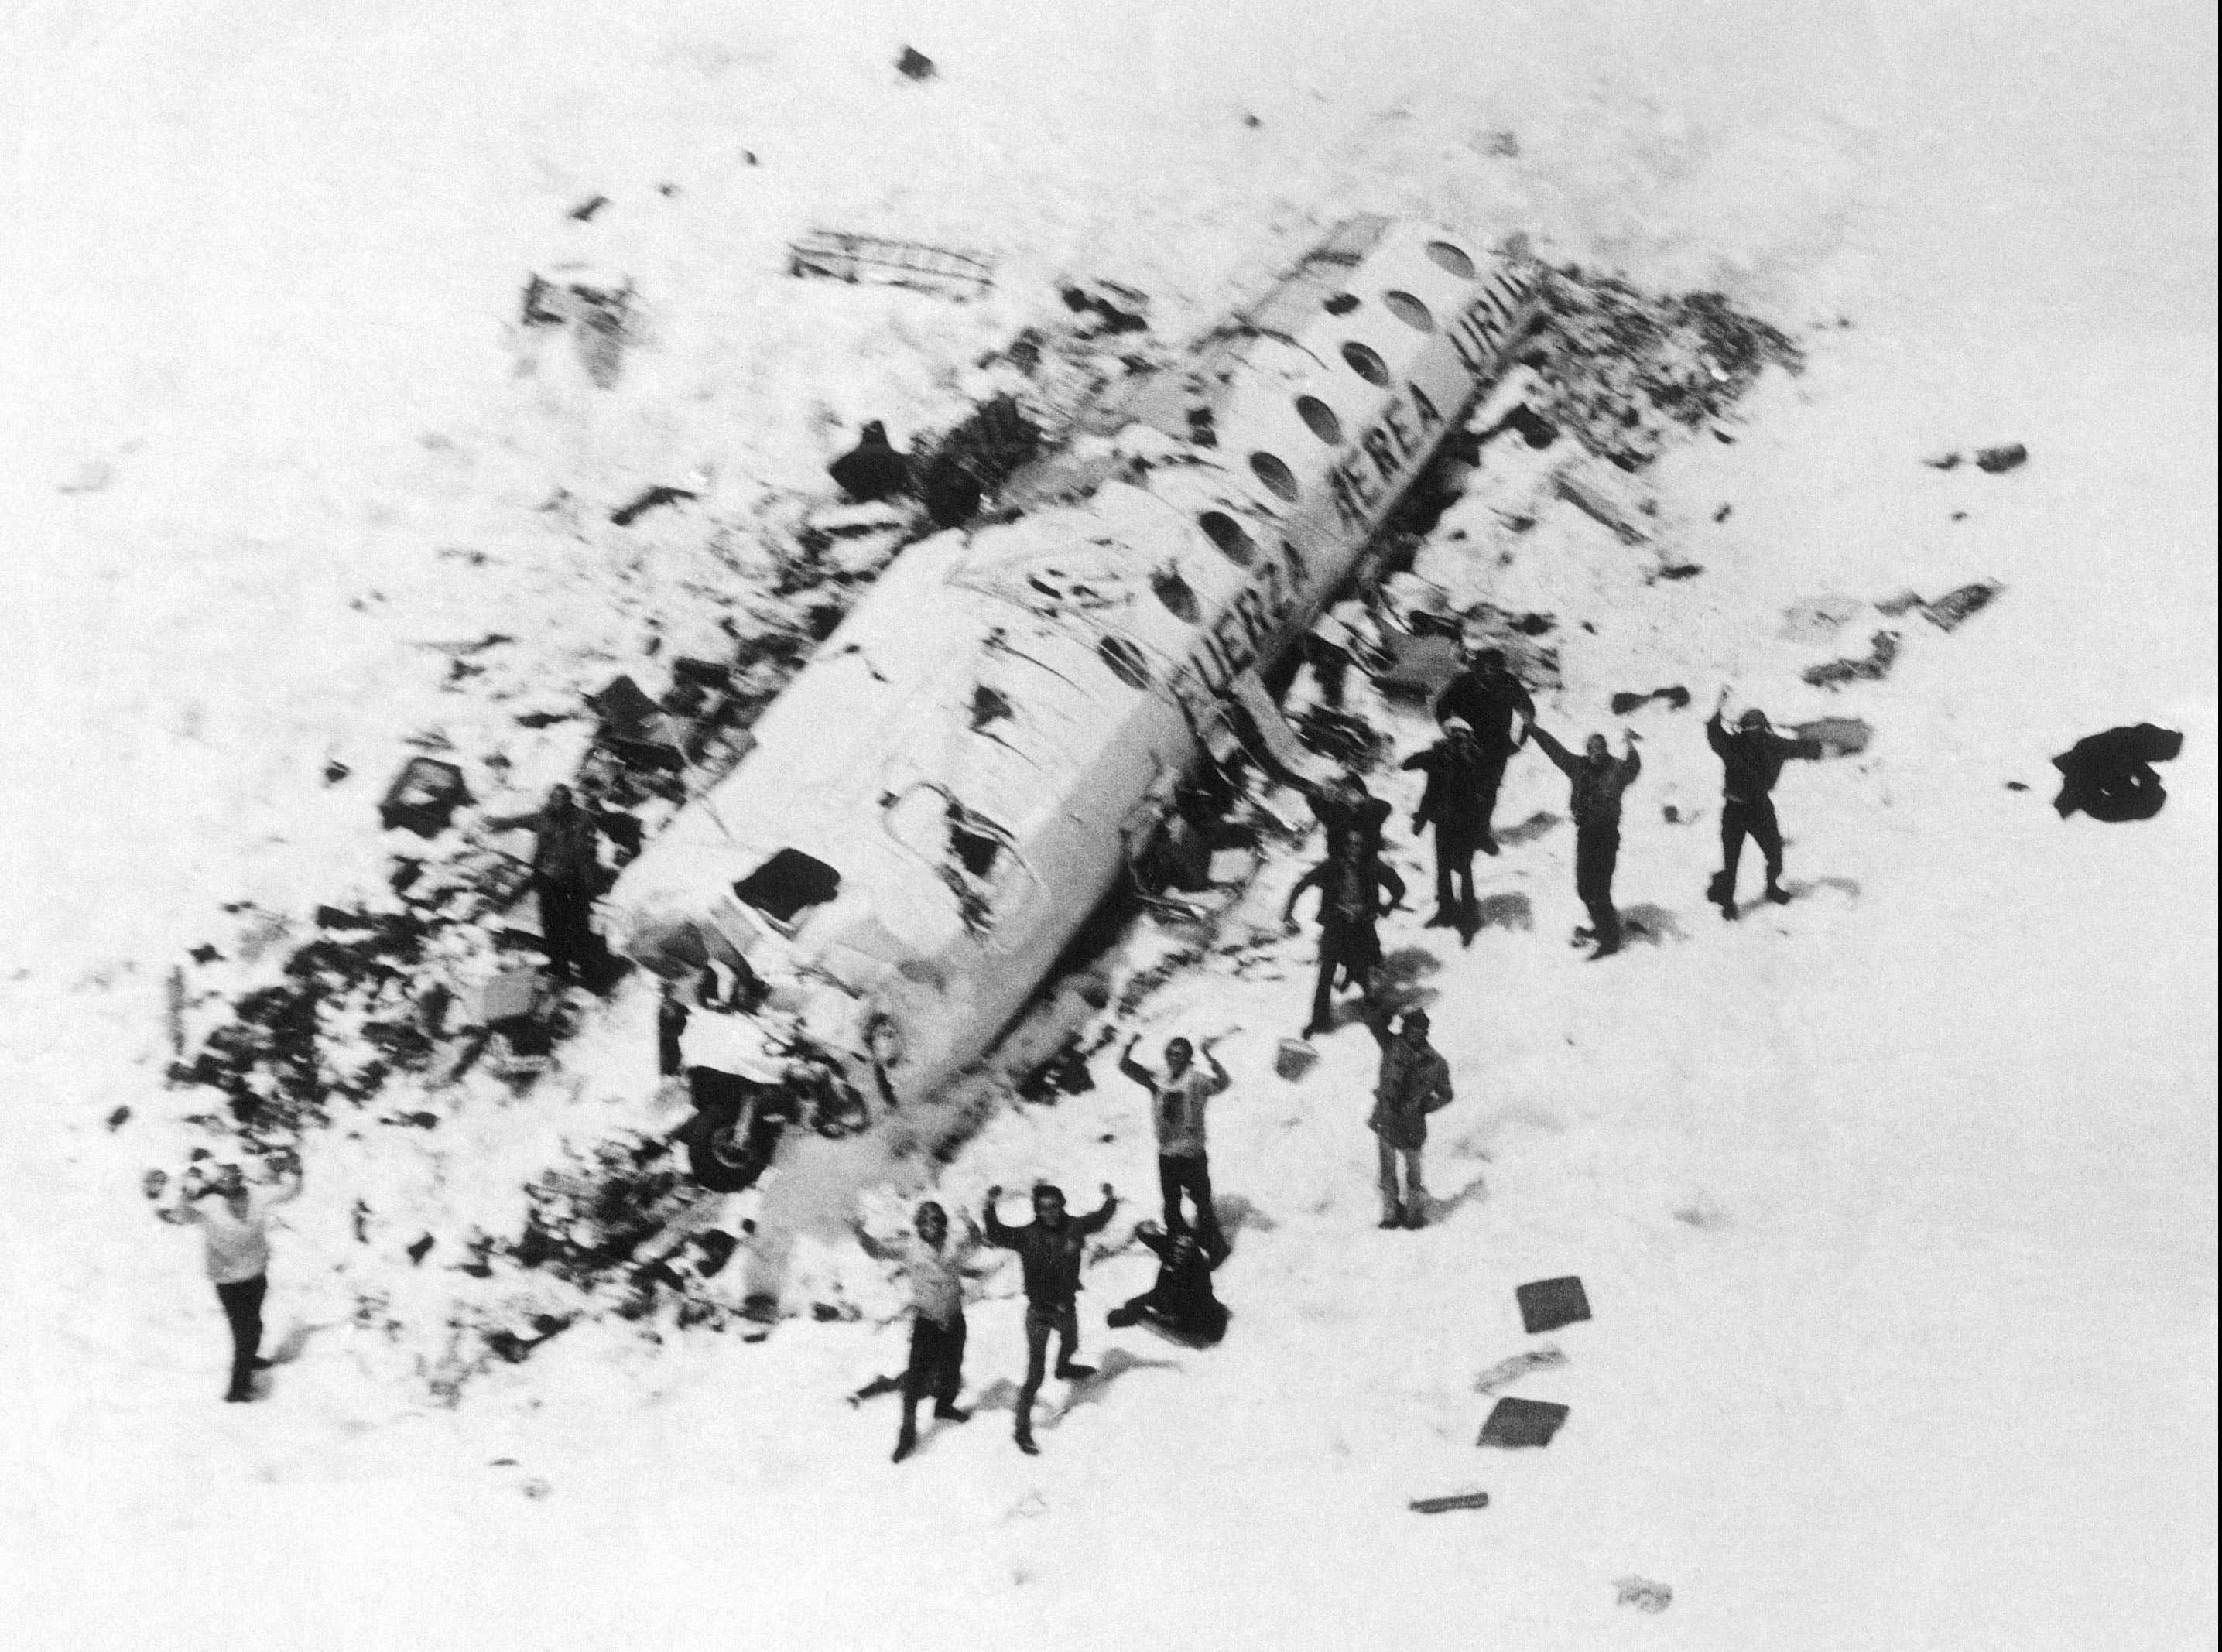 p'Society of the Snow' tells the horrifying true story of the 1972 disaster /p